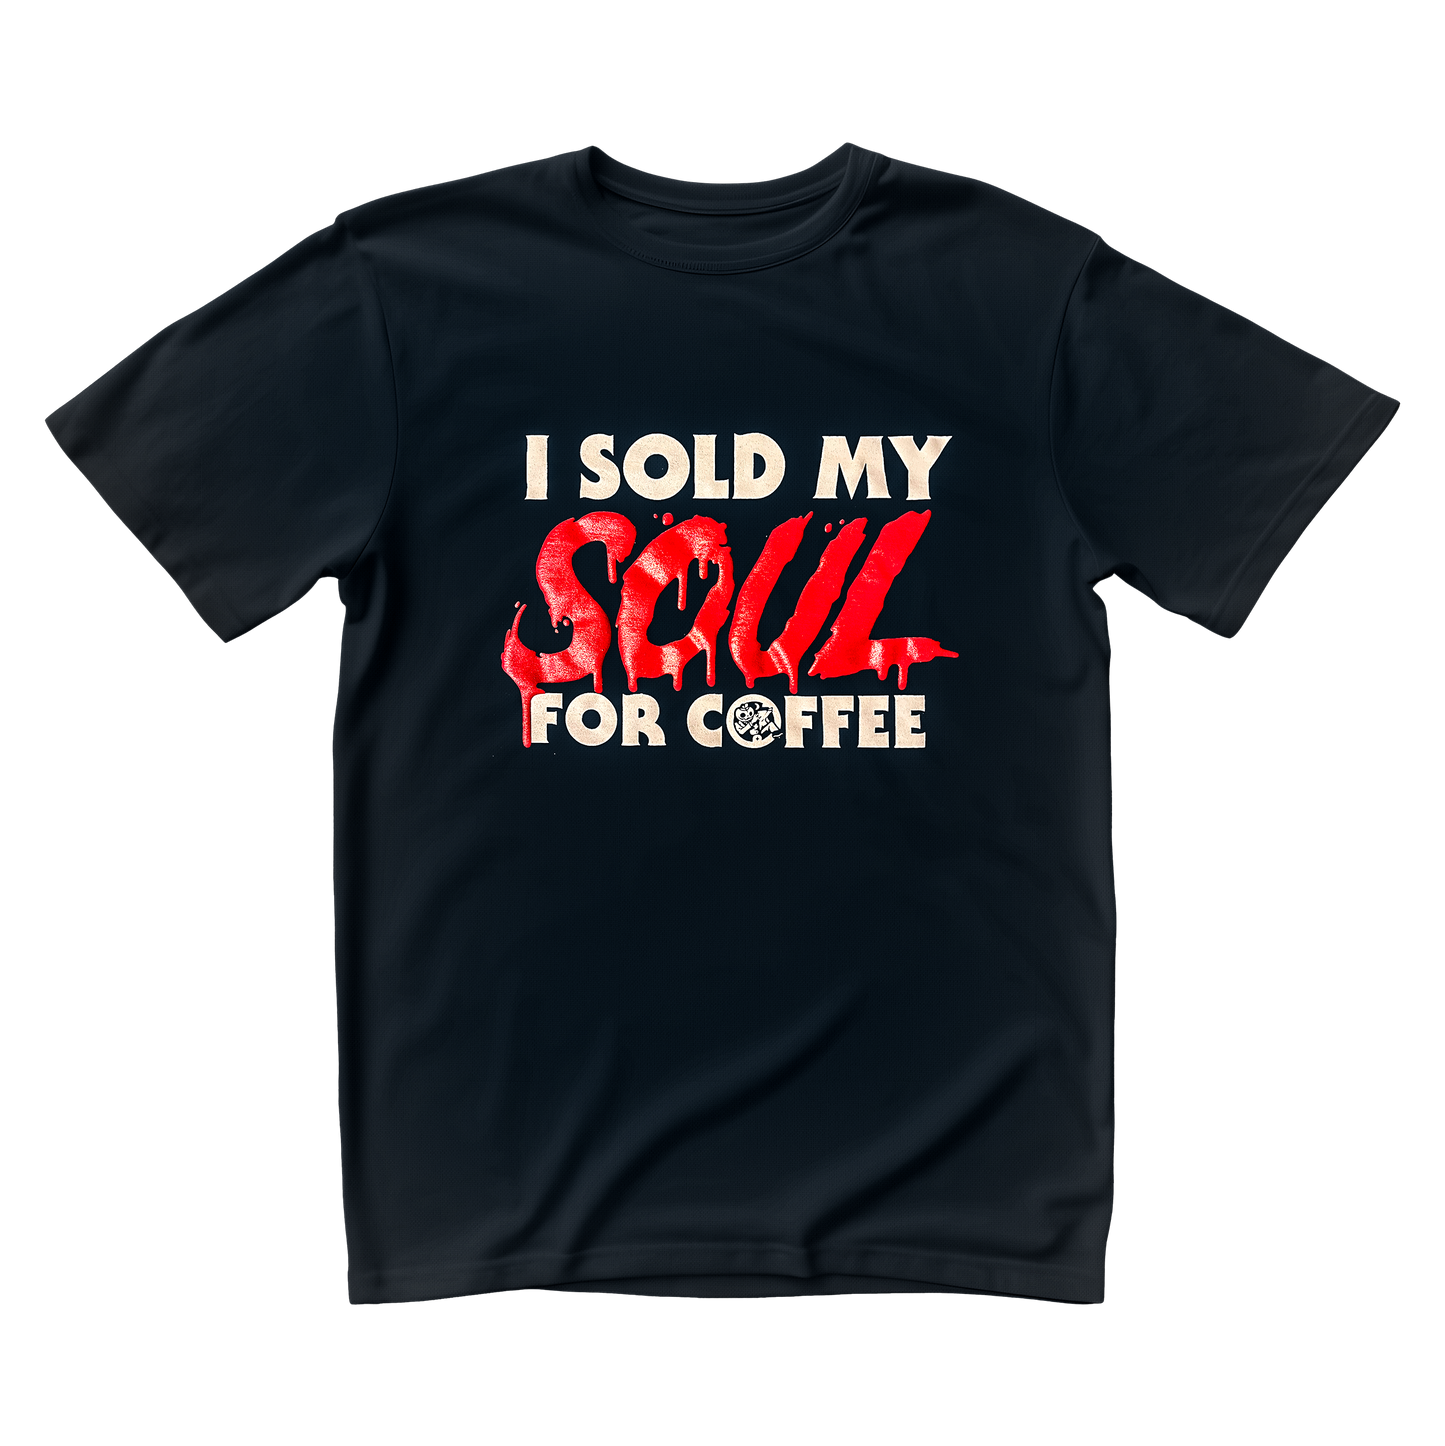 "I SOLD MY SOUL FOR COFFEE" t-shirt